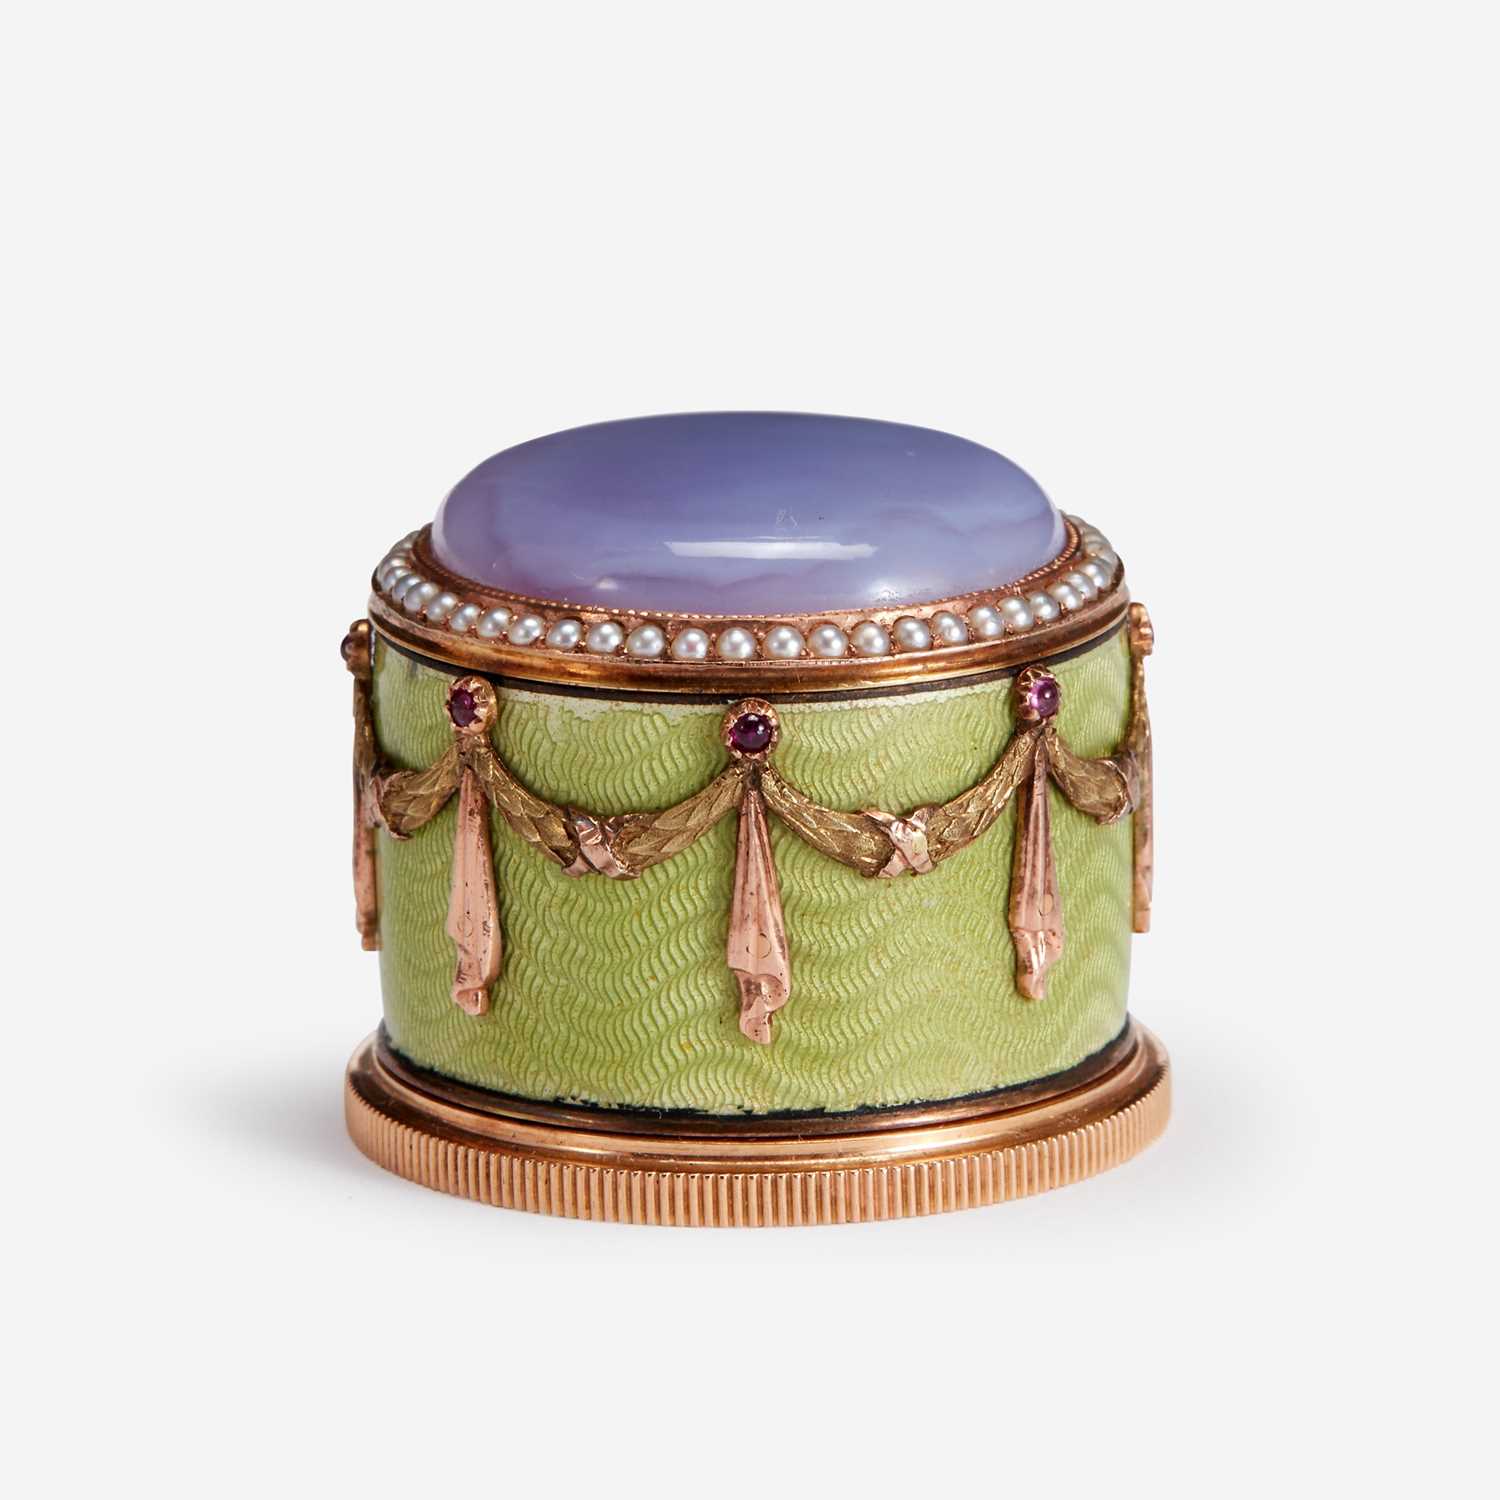 Lot 140 - A Fabergé Jewelled, Guilloché Enamel and Two-Color Gold Pomade